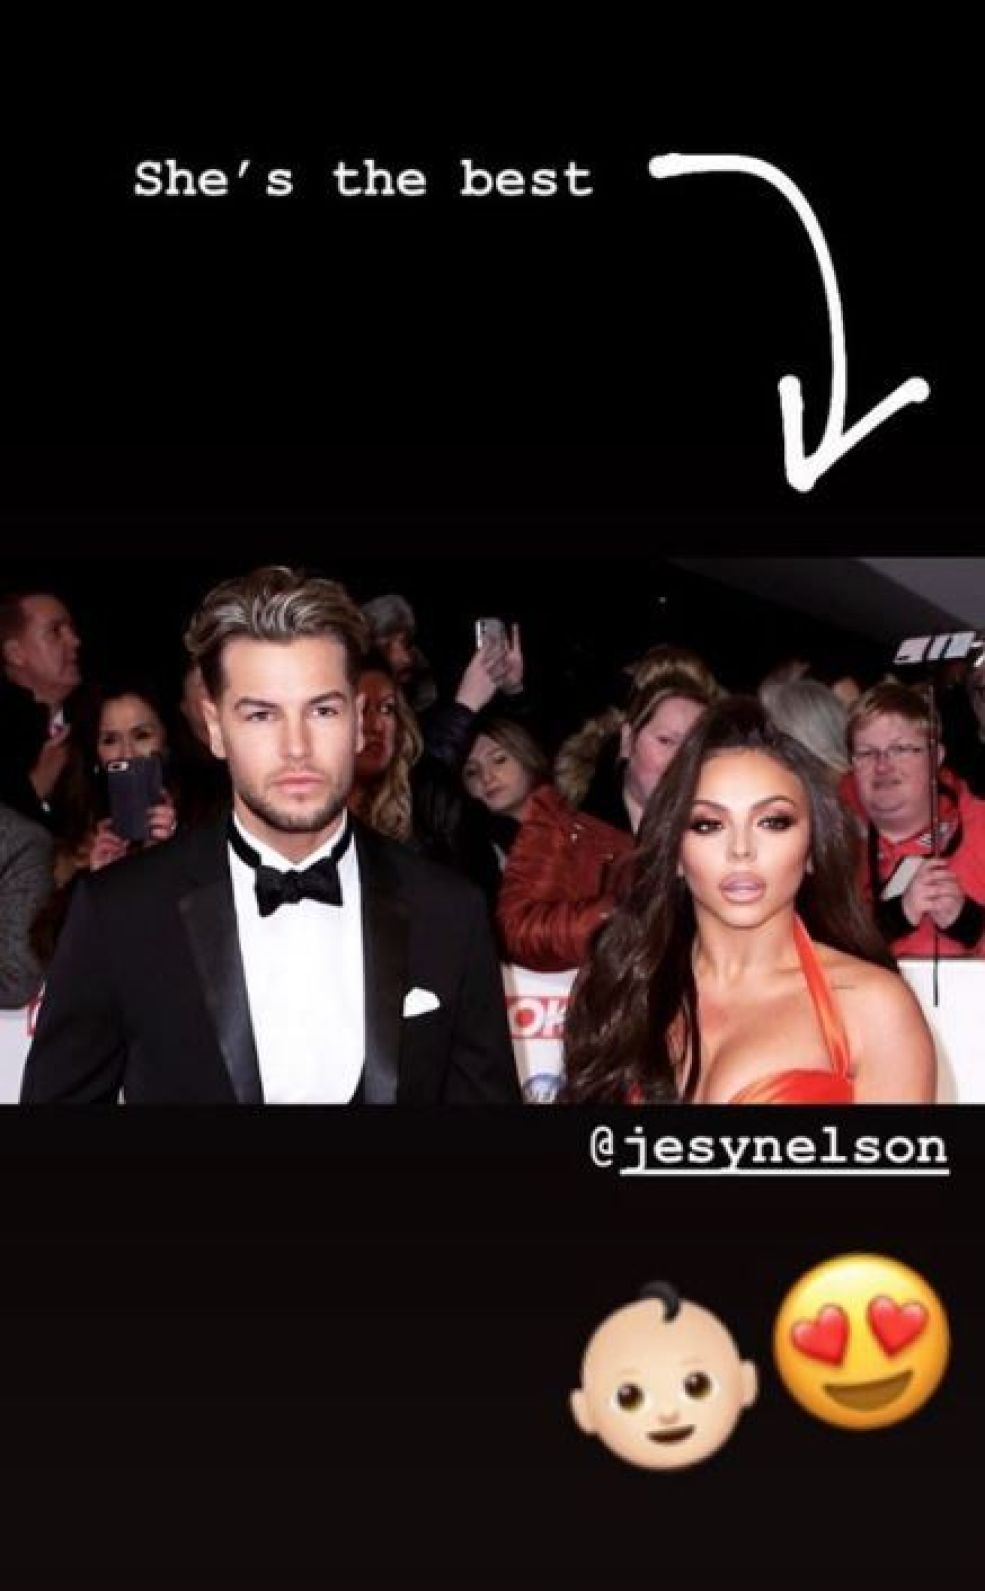 Chris Hughes Posts A Baby Emoji & Fans Little Mix's Jesy Nelson May Be Pregnant